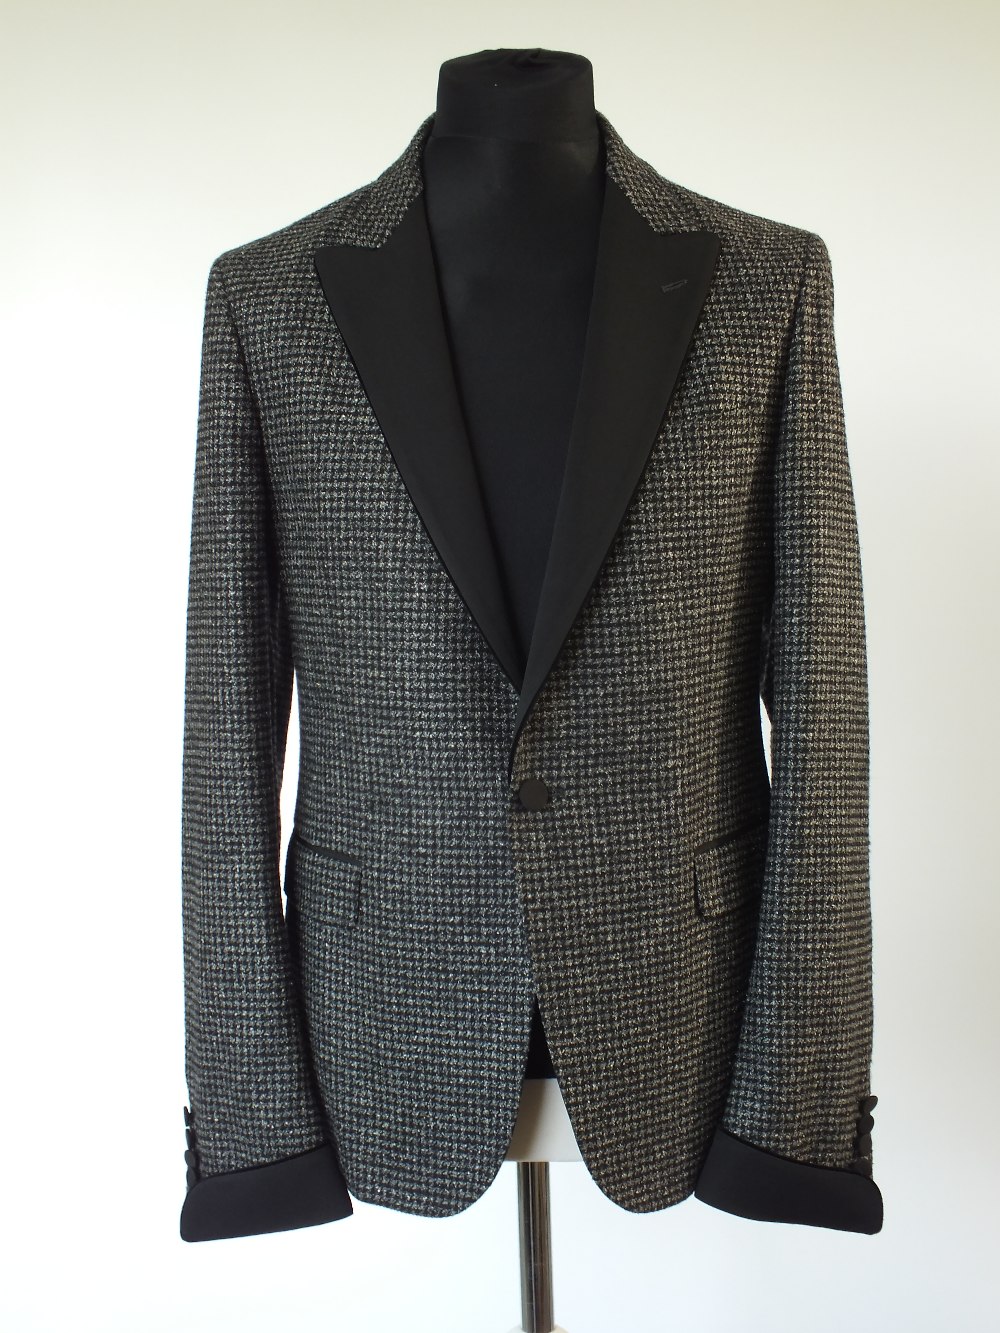 A Gucci dinner suit, dark grey dog tooth check, silk twill detailing to lapel and jacket, single